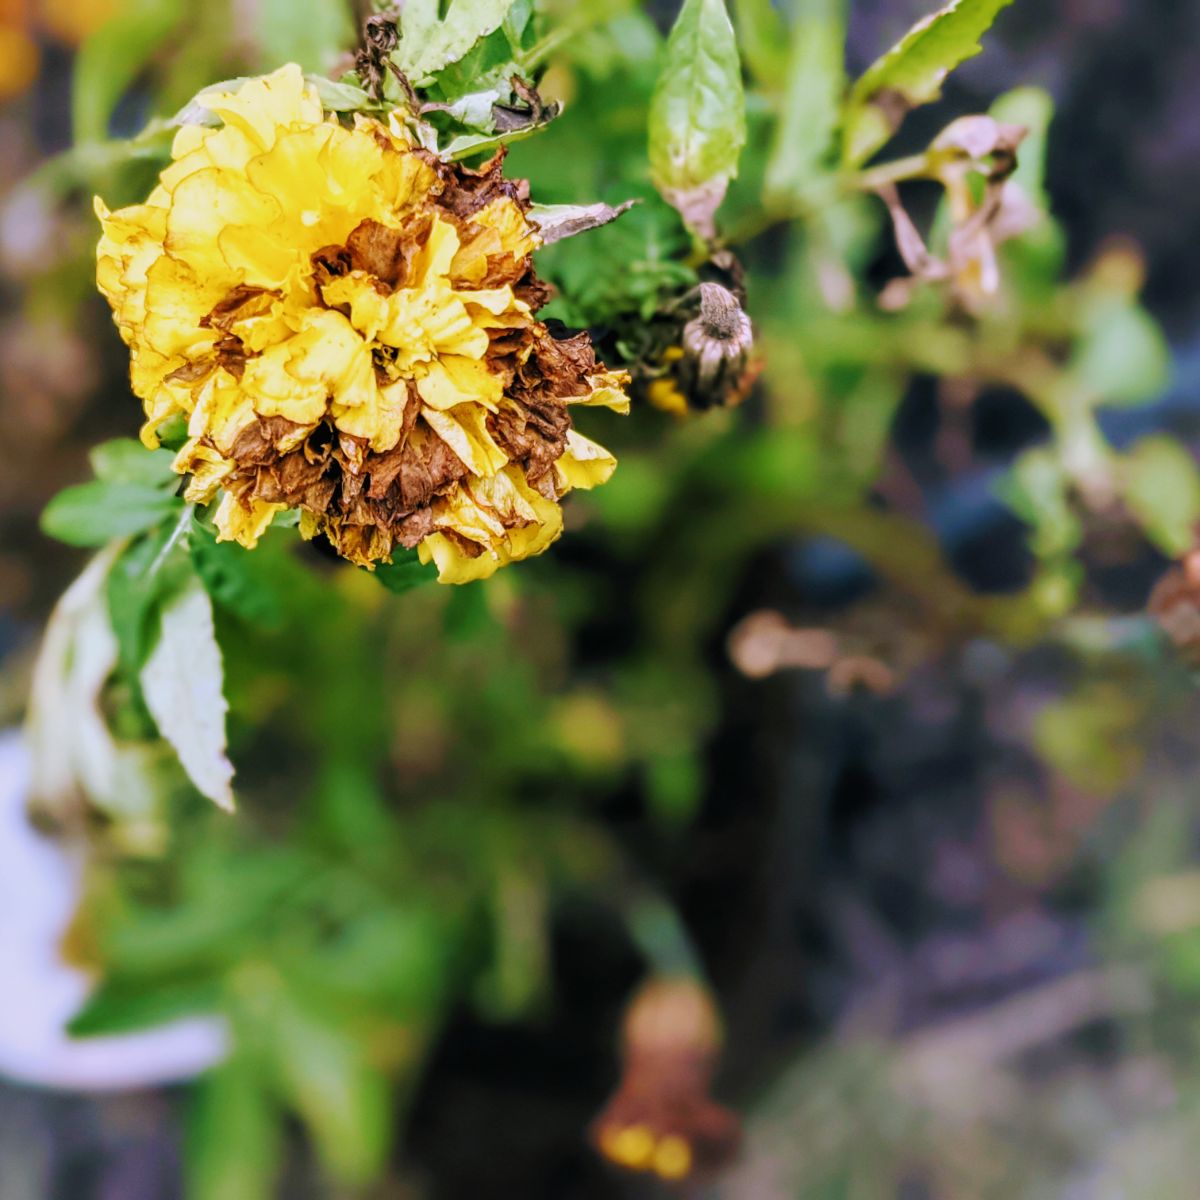 What to do with Marigolds at the end of the season - dying yellow marigold plant